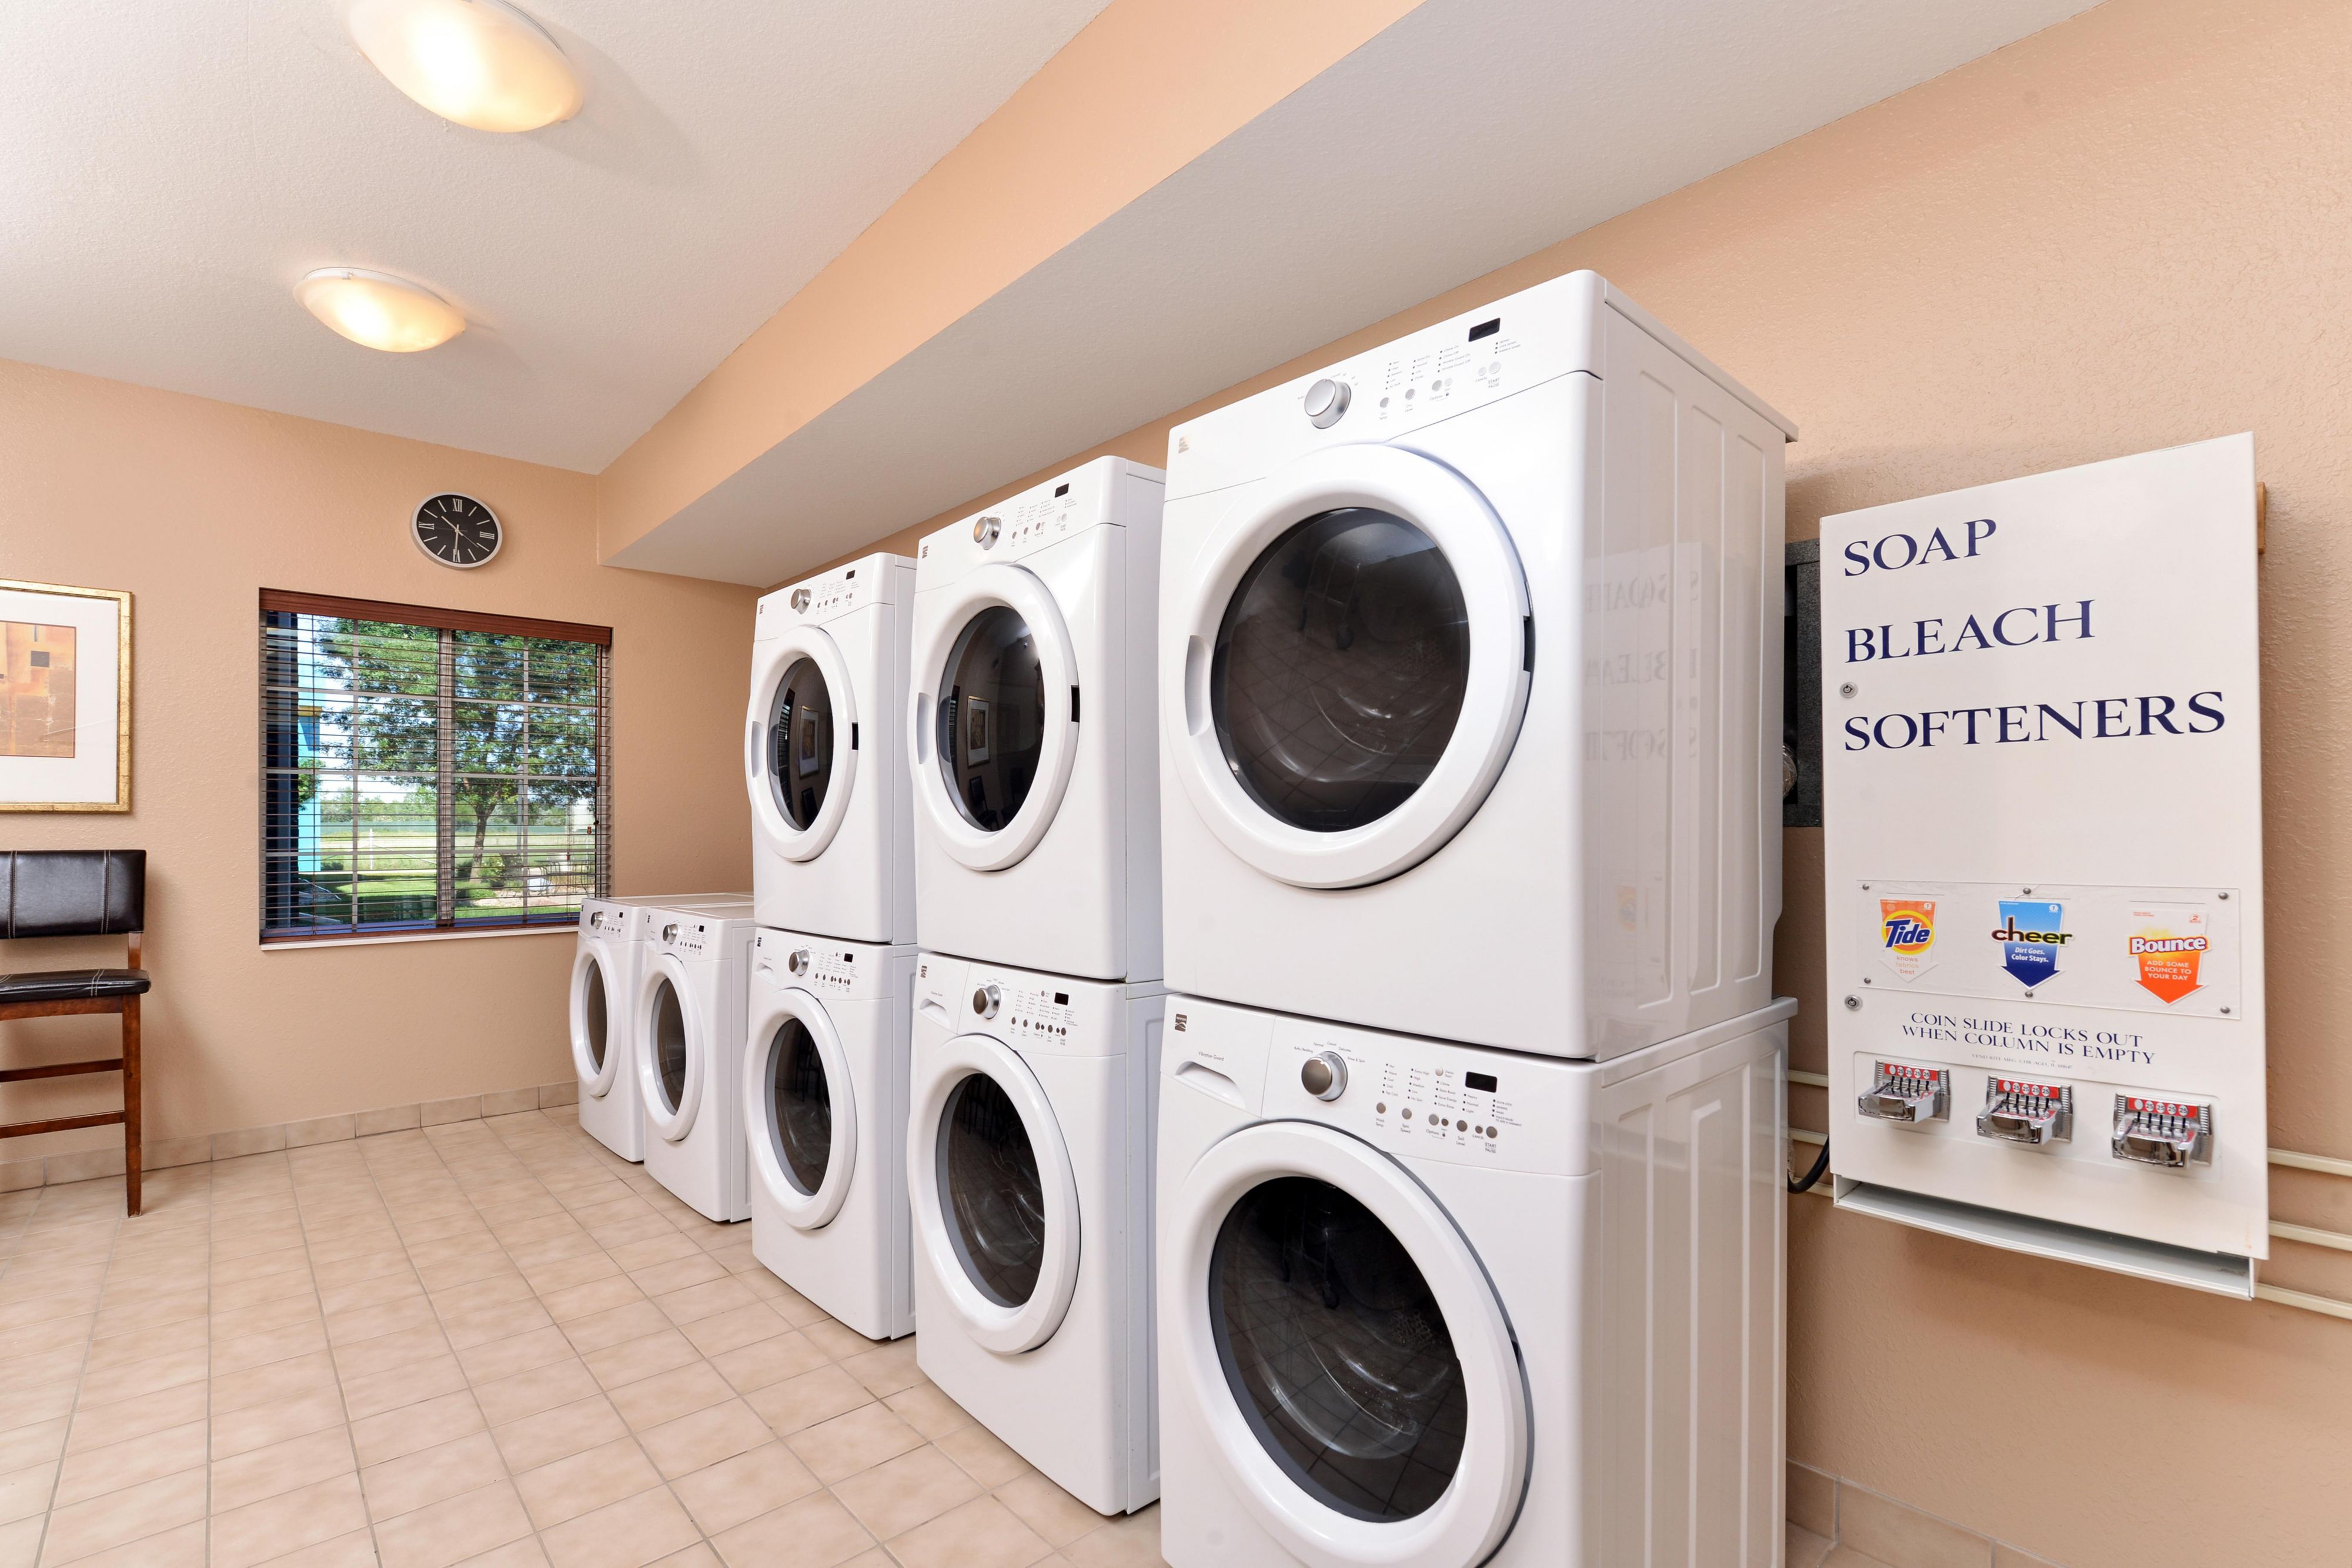 Help yourself to free laundry machines for when life gets messy.
Guests can use the on-site washers and dryers 24 hours a day.
